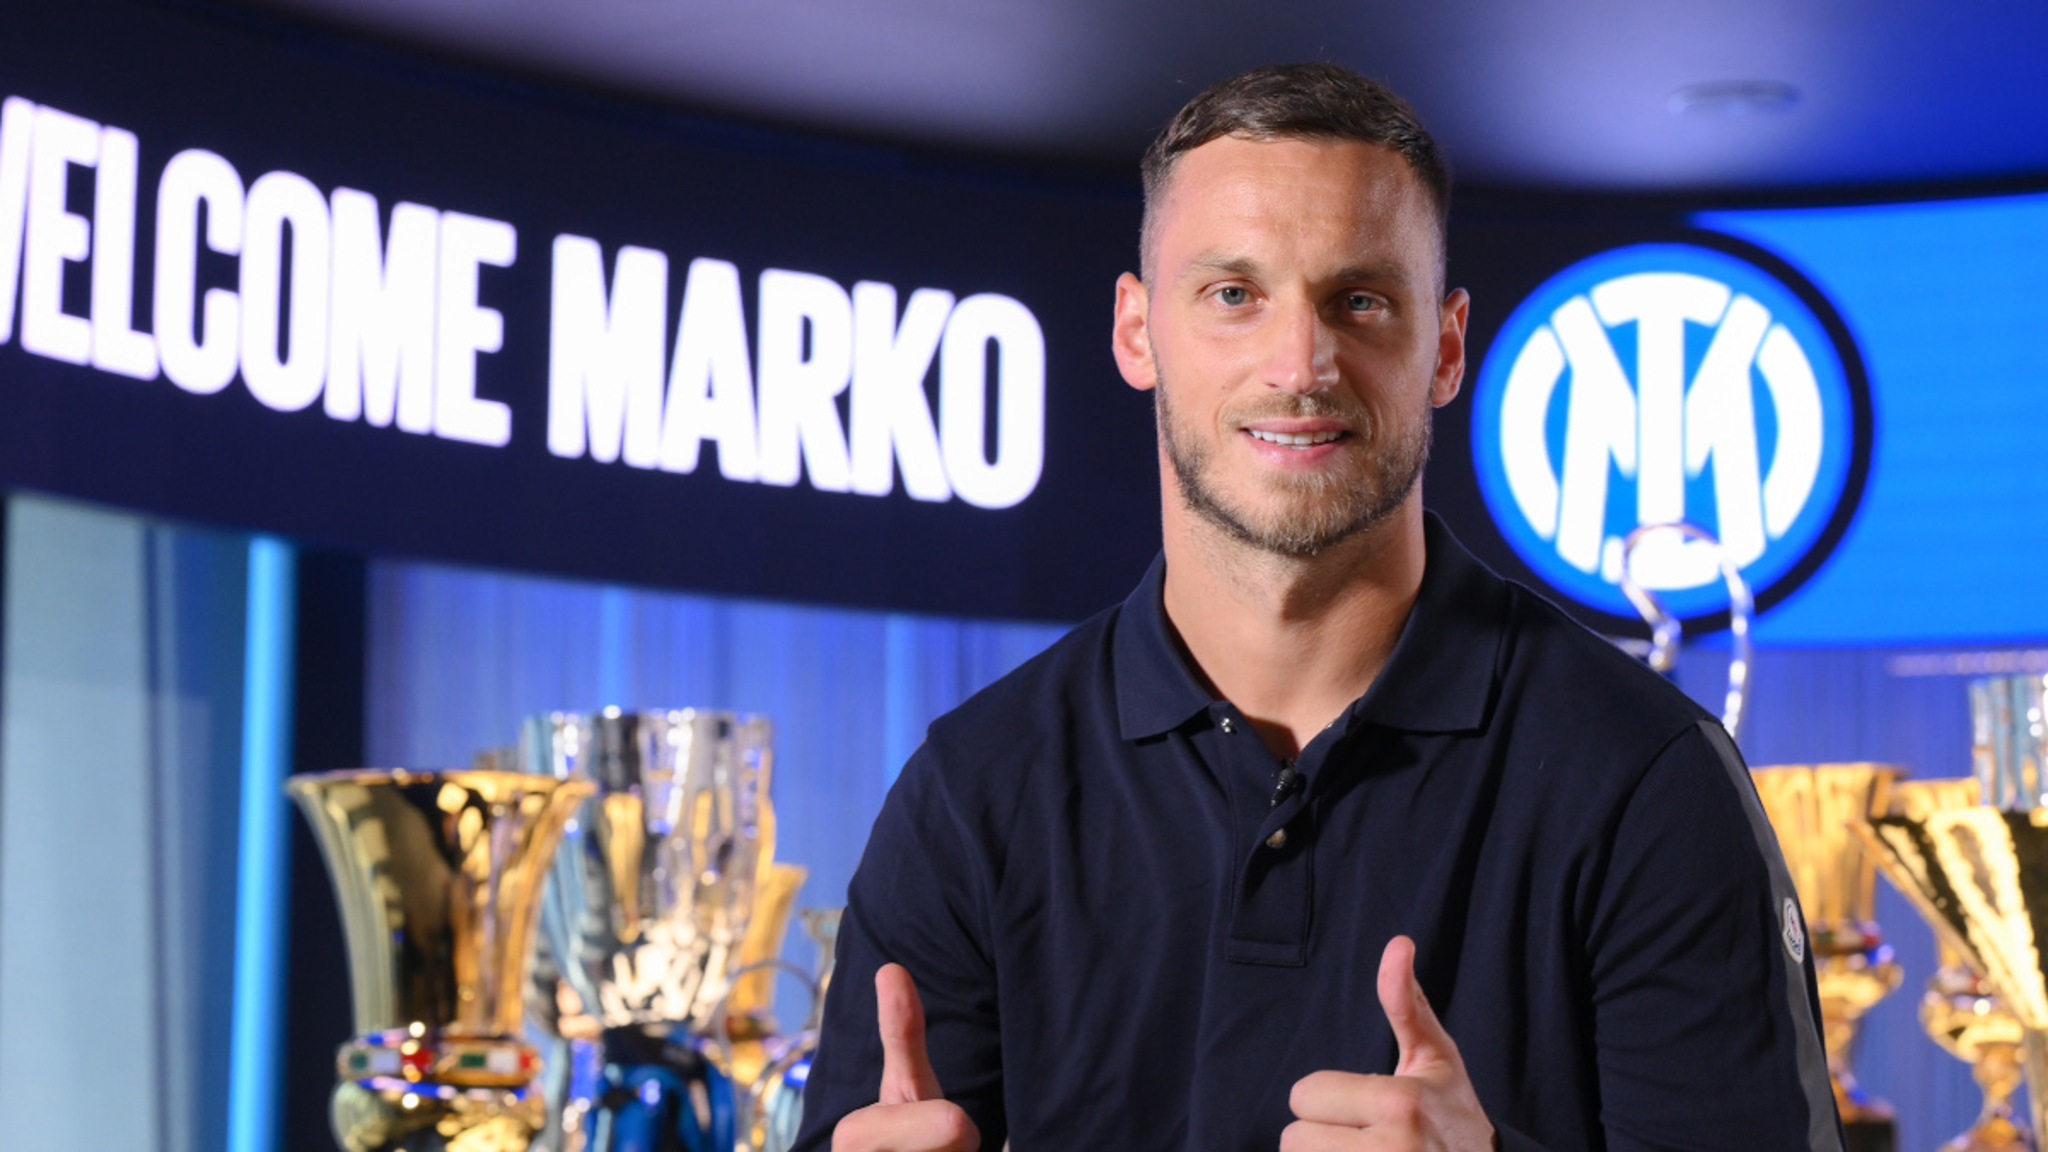  Marko Arnautovic is a professional soccer player from Austria who plays as a forward for Serie A club Bologna and the Austria national team.